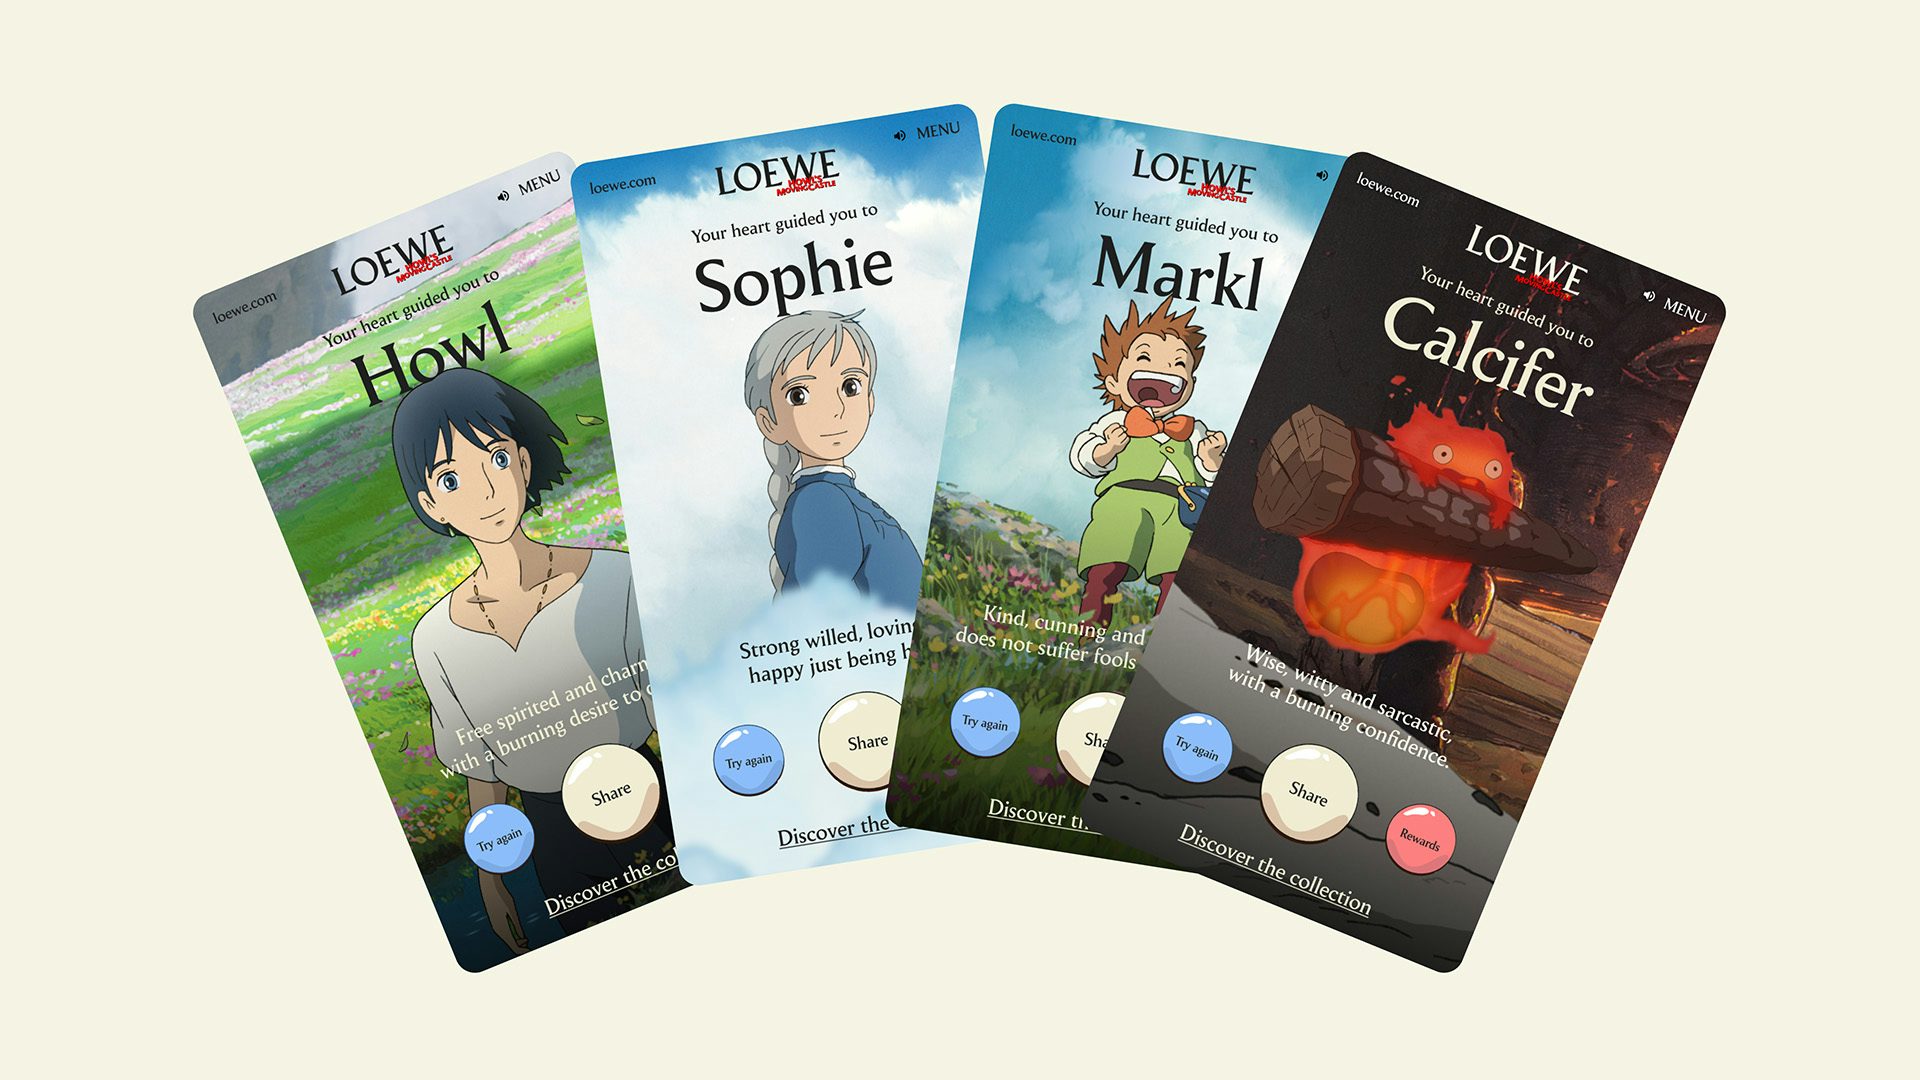 Image shows four screenshots of screens used in Loewe's digital experience in collaboration with Howl's Moving Castle. The screens show four characters, Howl, Sophie, Markl and Calcifer